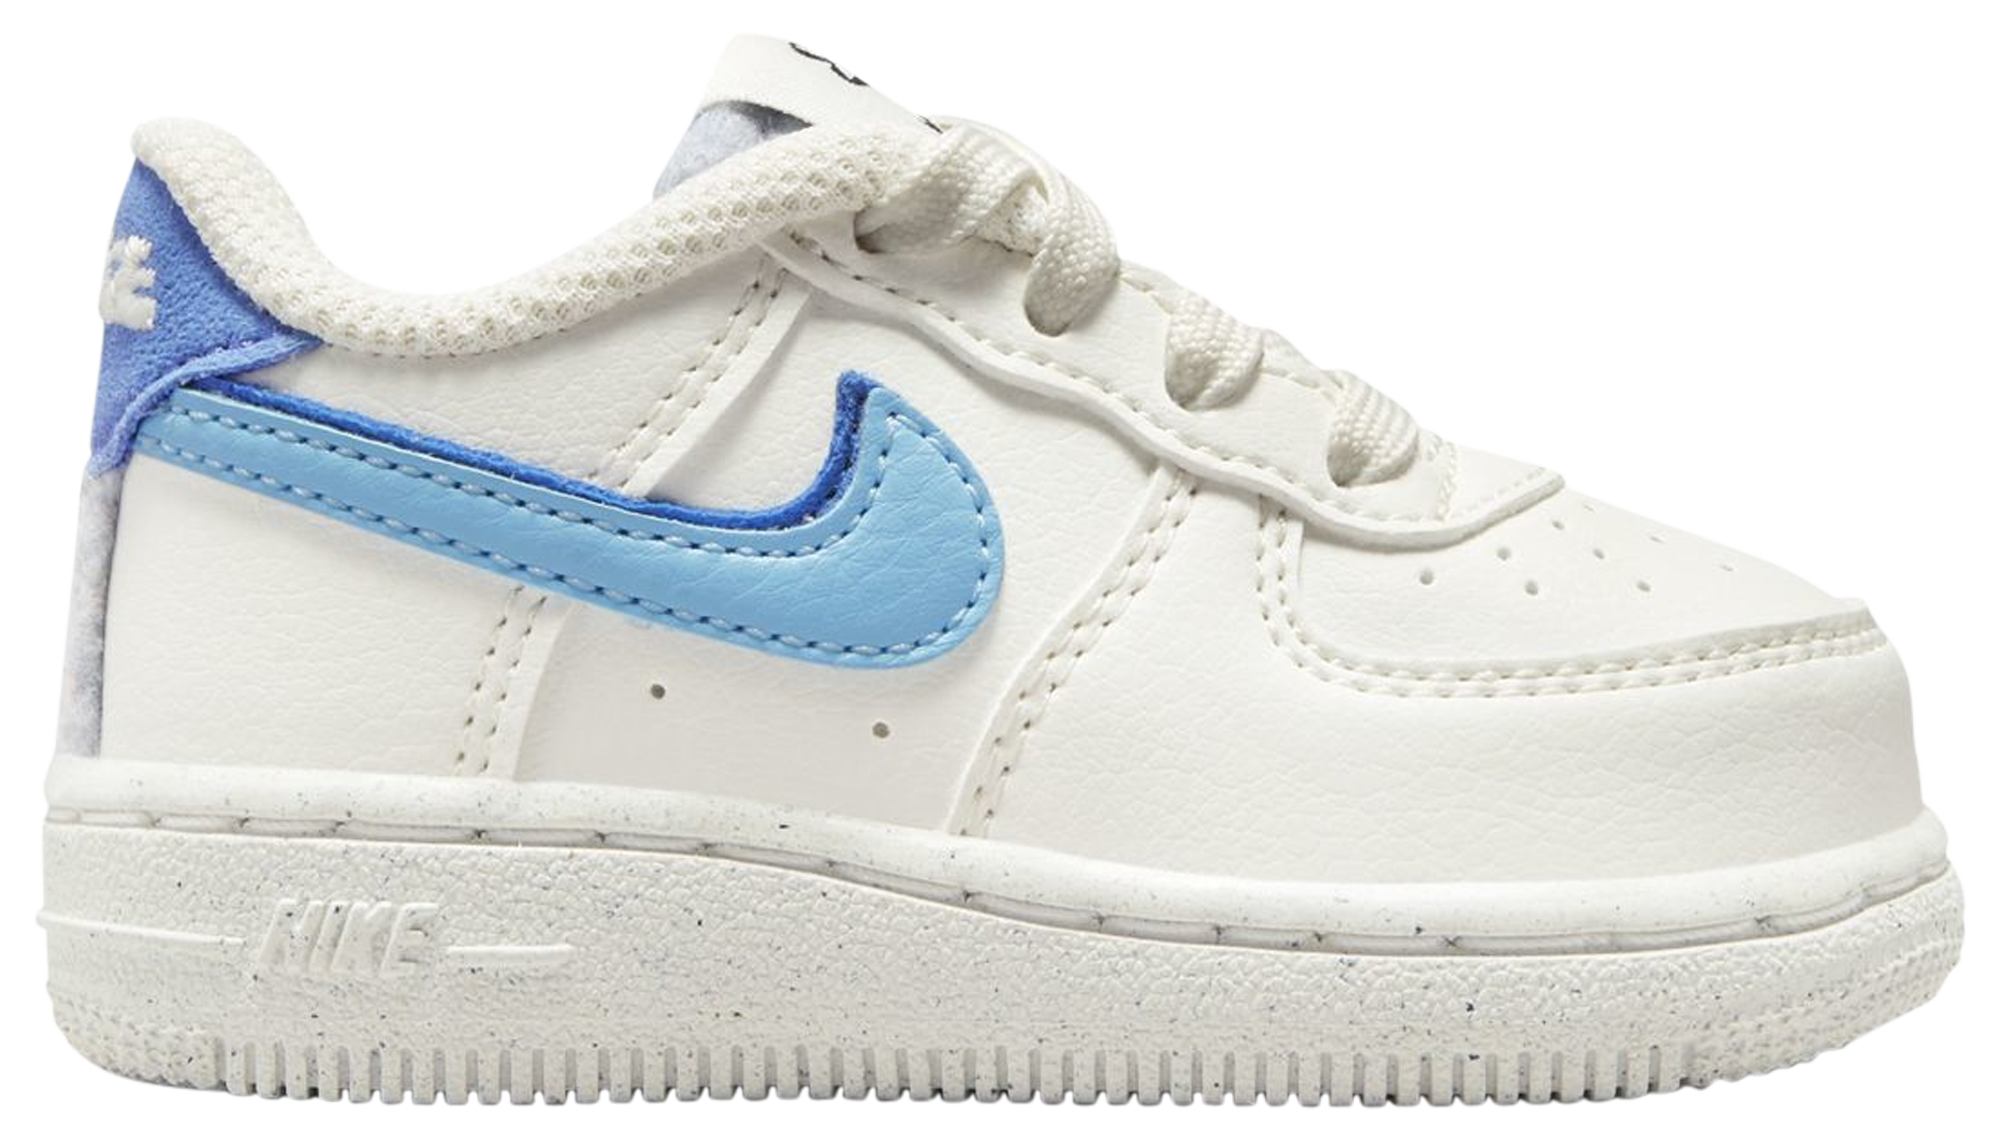 Nike Toddler Boys' Air Force 1 LV8 Basketball Shoes